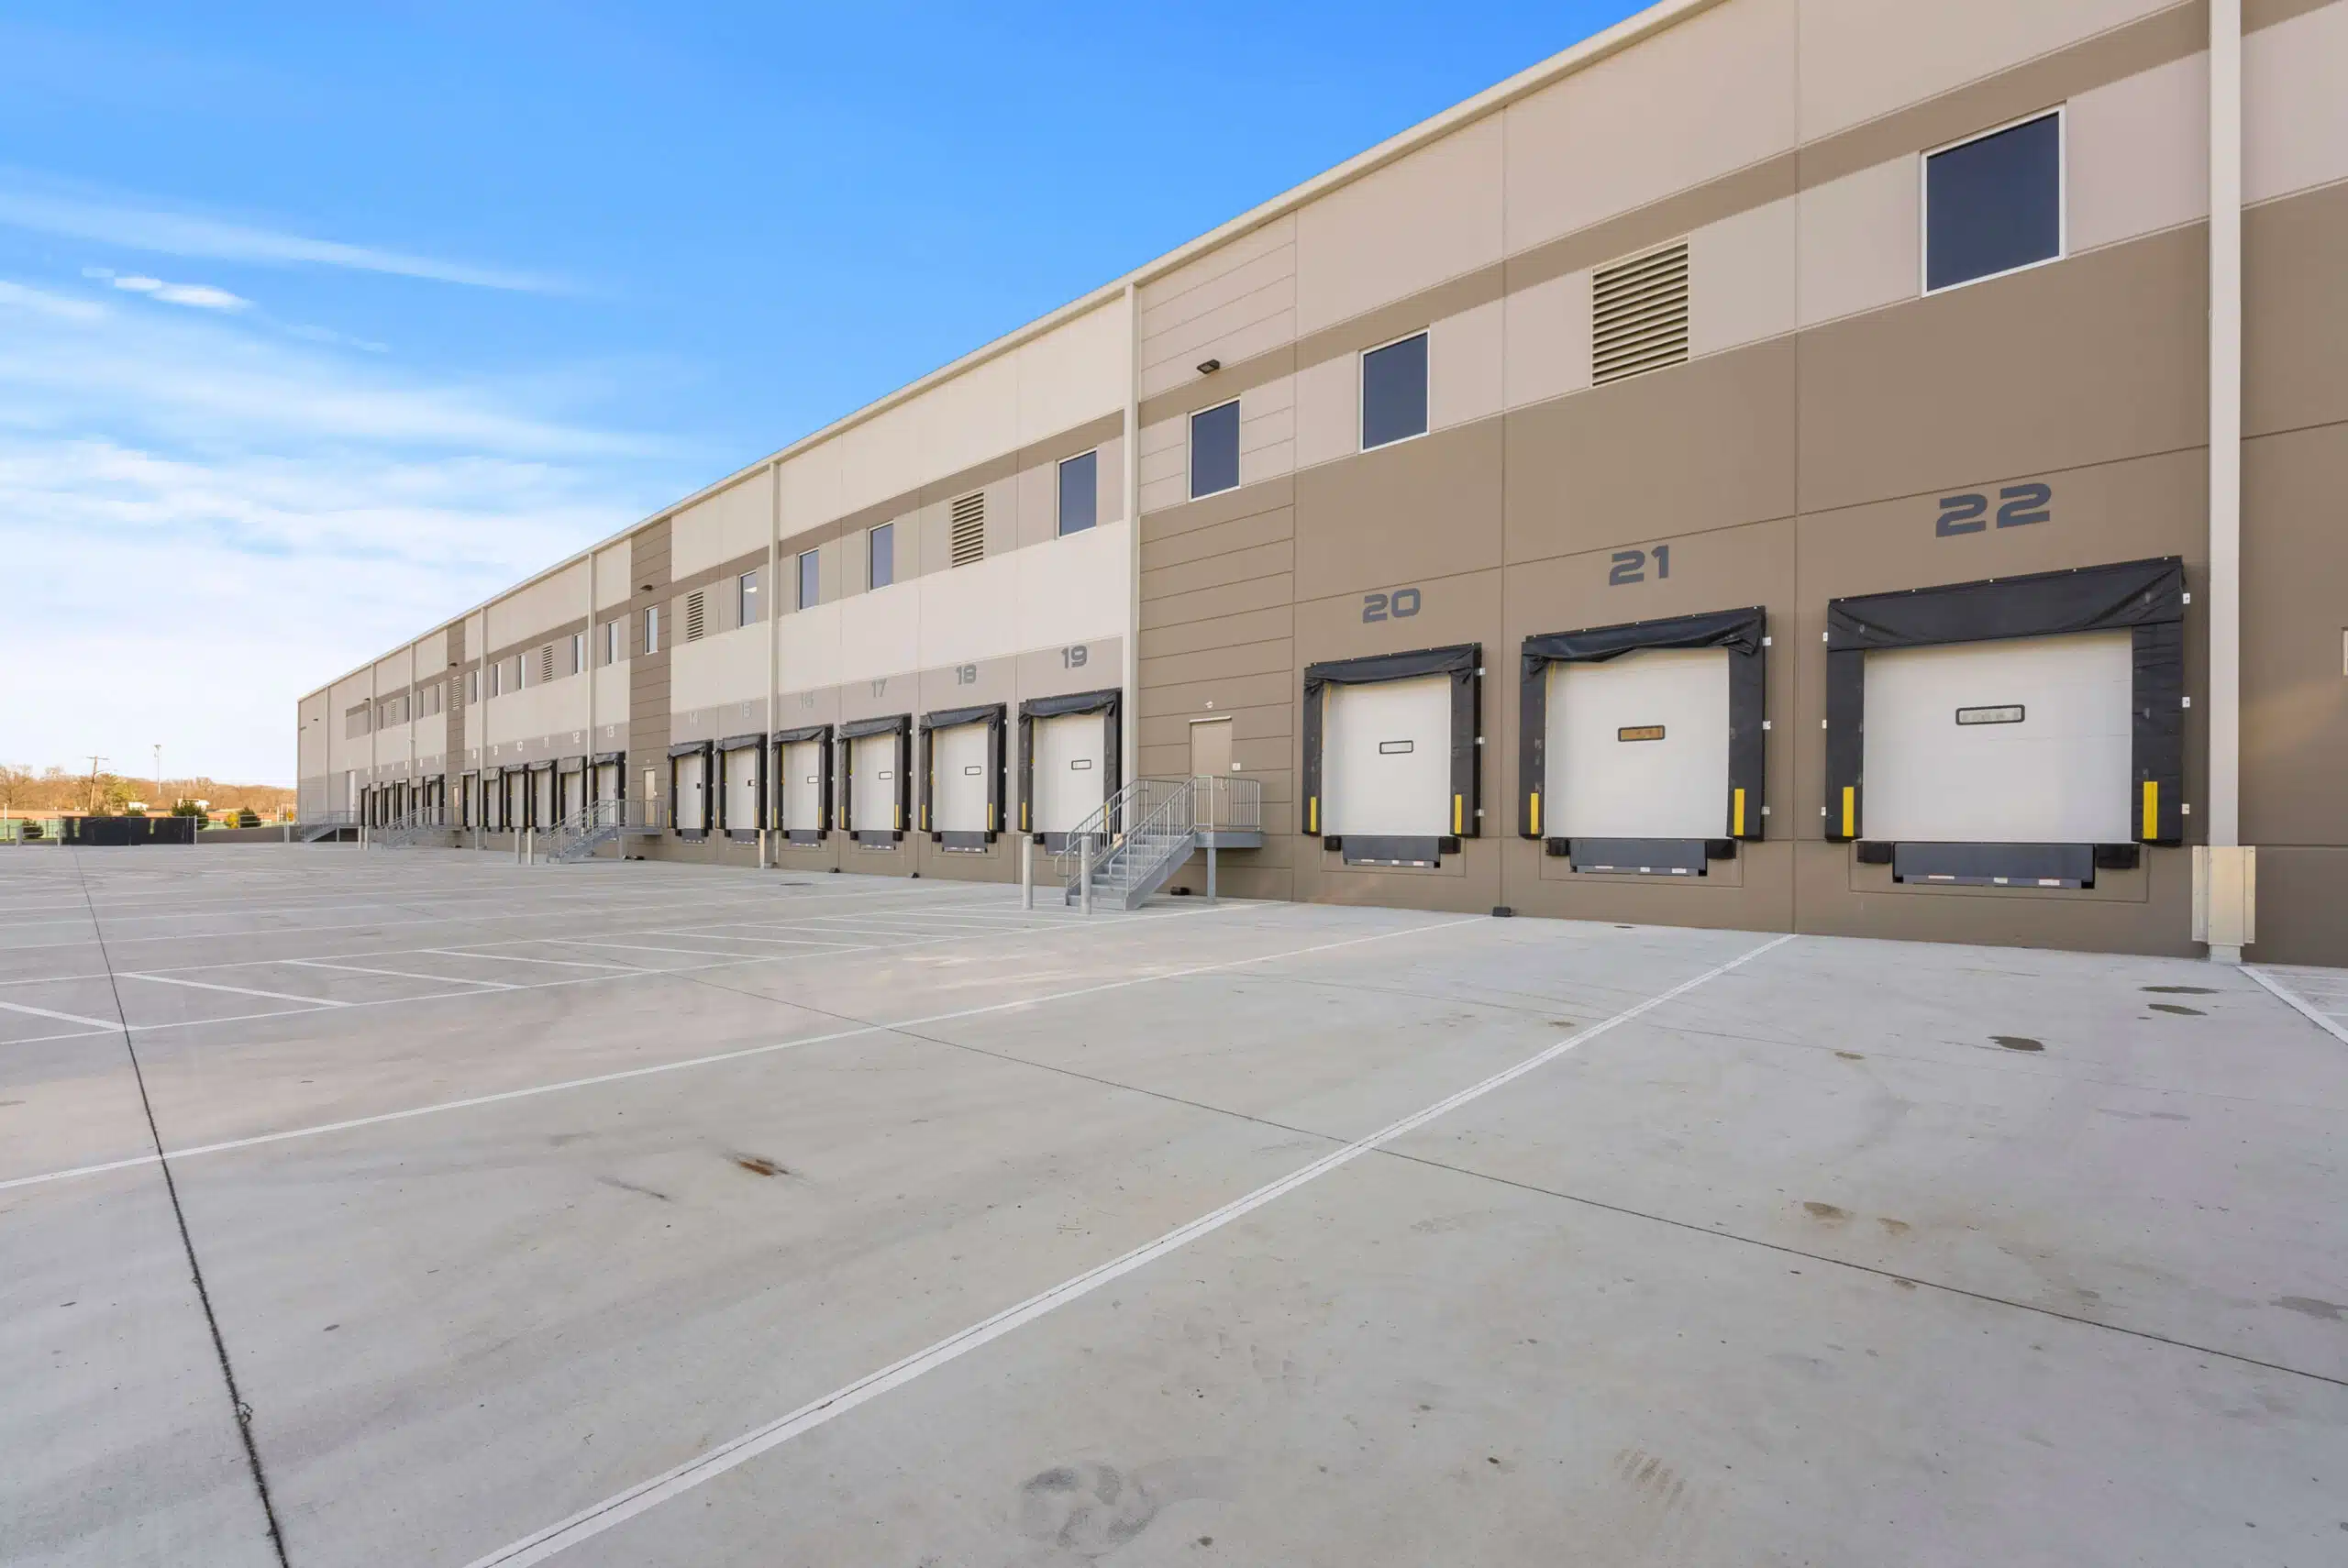 An warehouse with multiple large doors, providing ample space for storage and easy access.